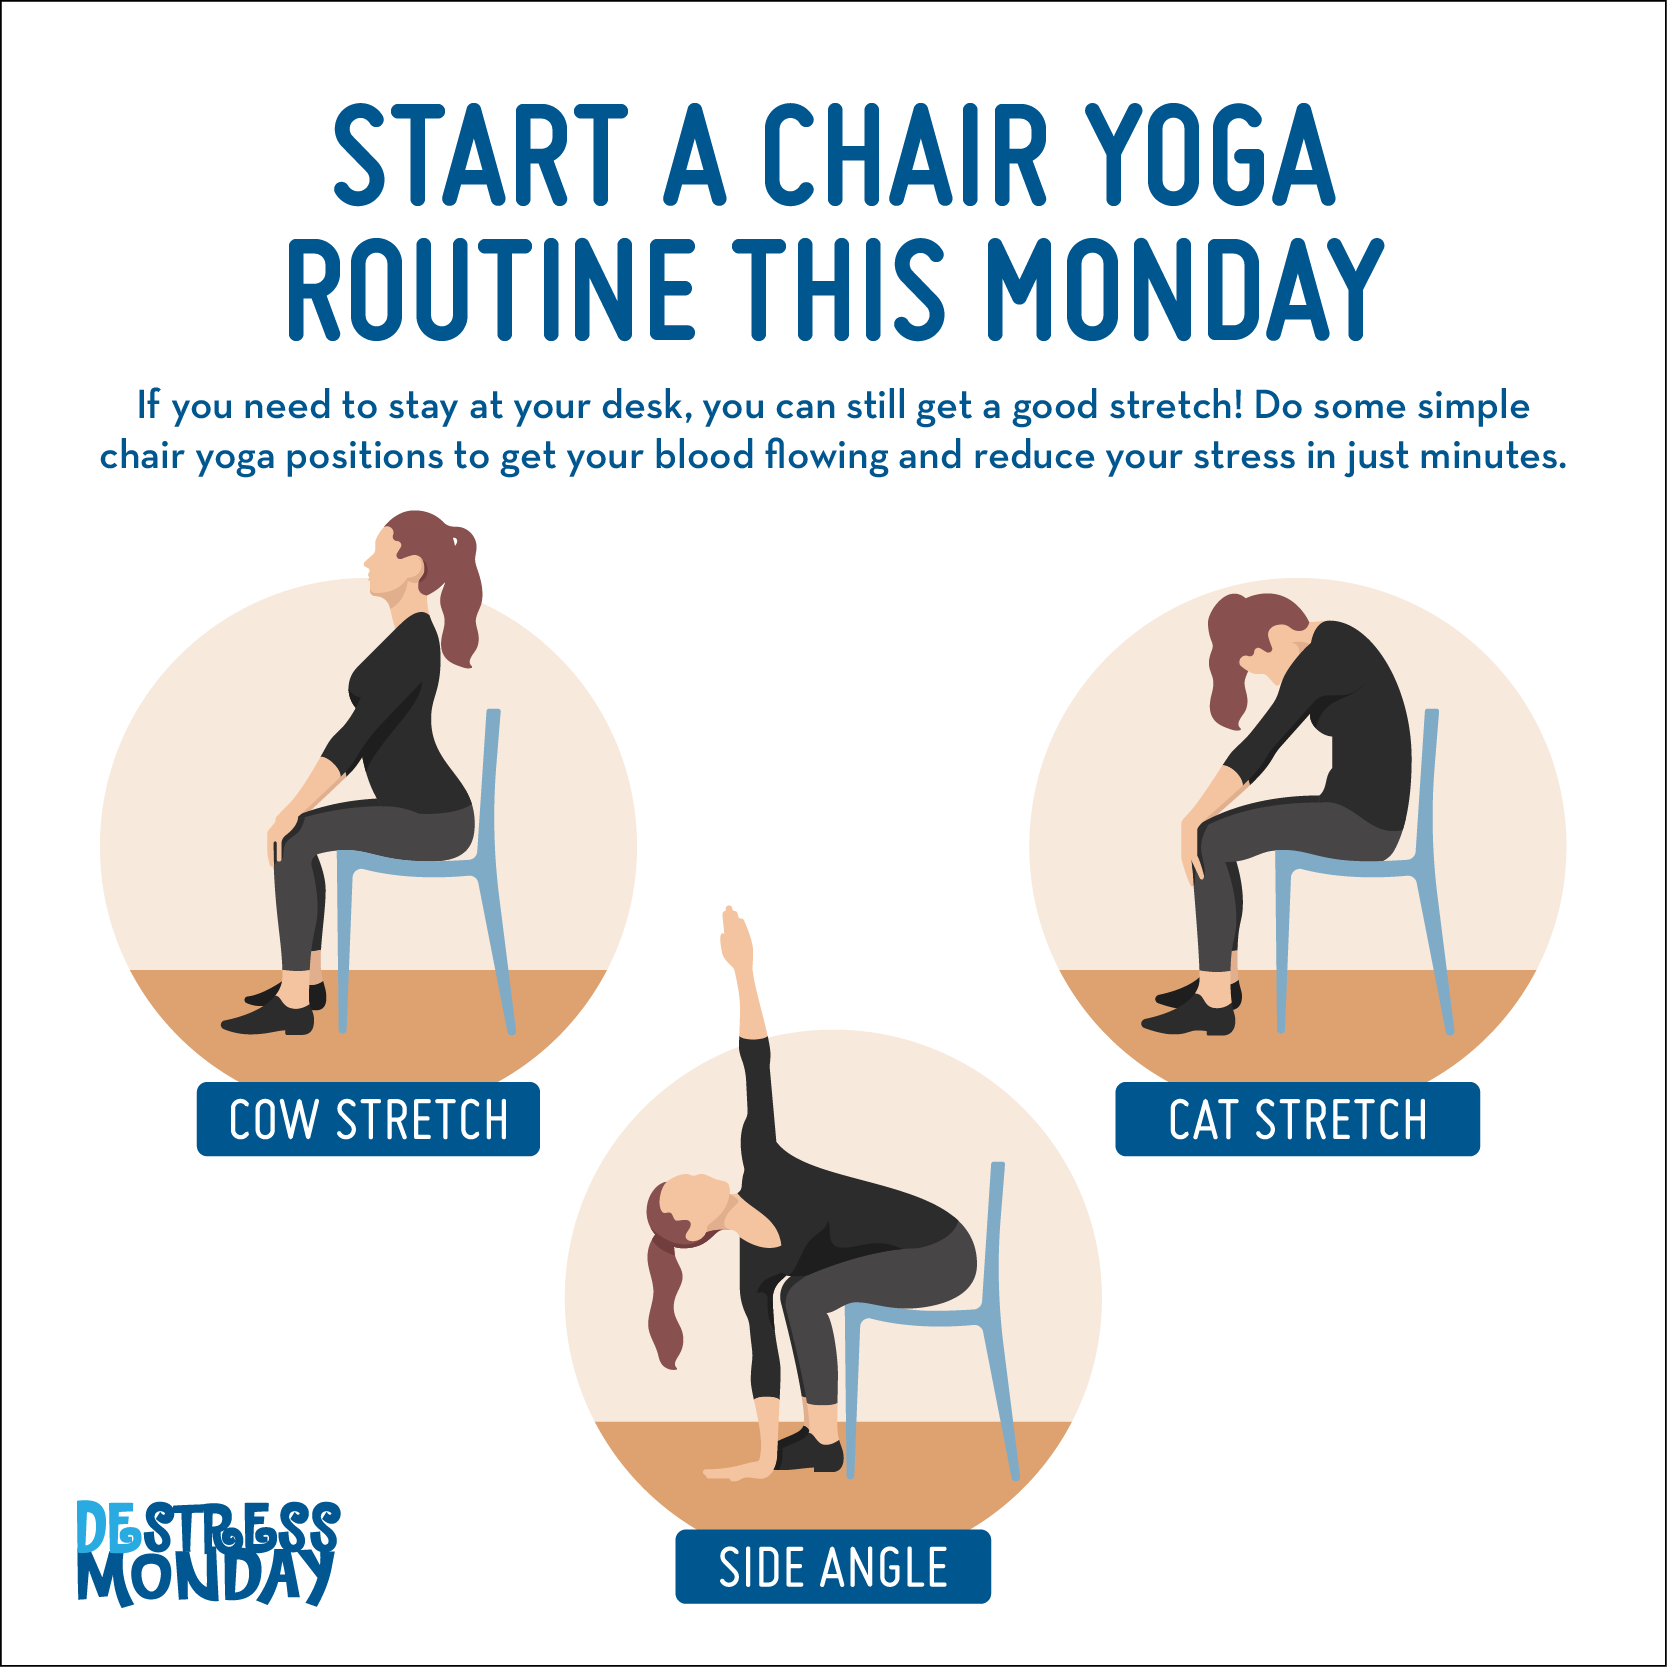 https://www.mondaycampaigns.org/wp-content/uploads/2020/04/destress-monday-graphic-chair-yoga.png